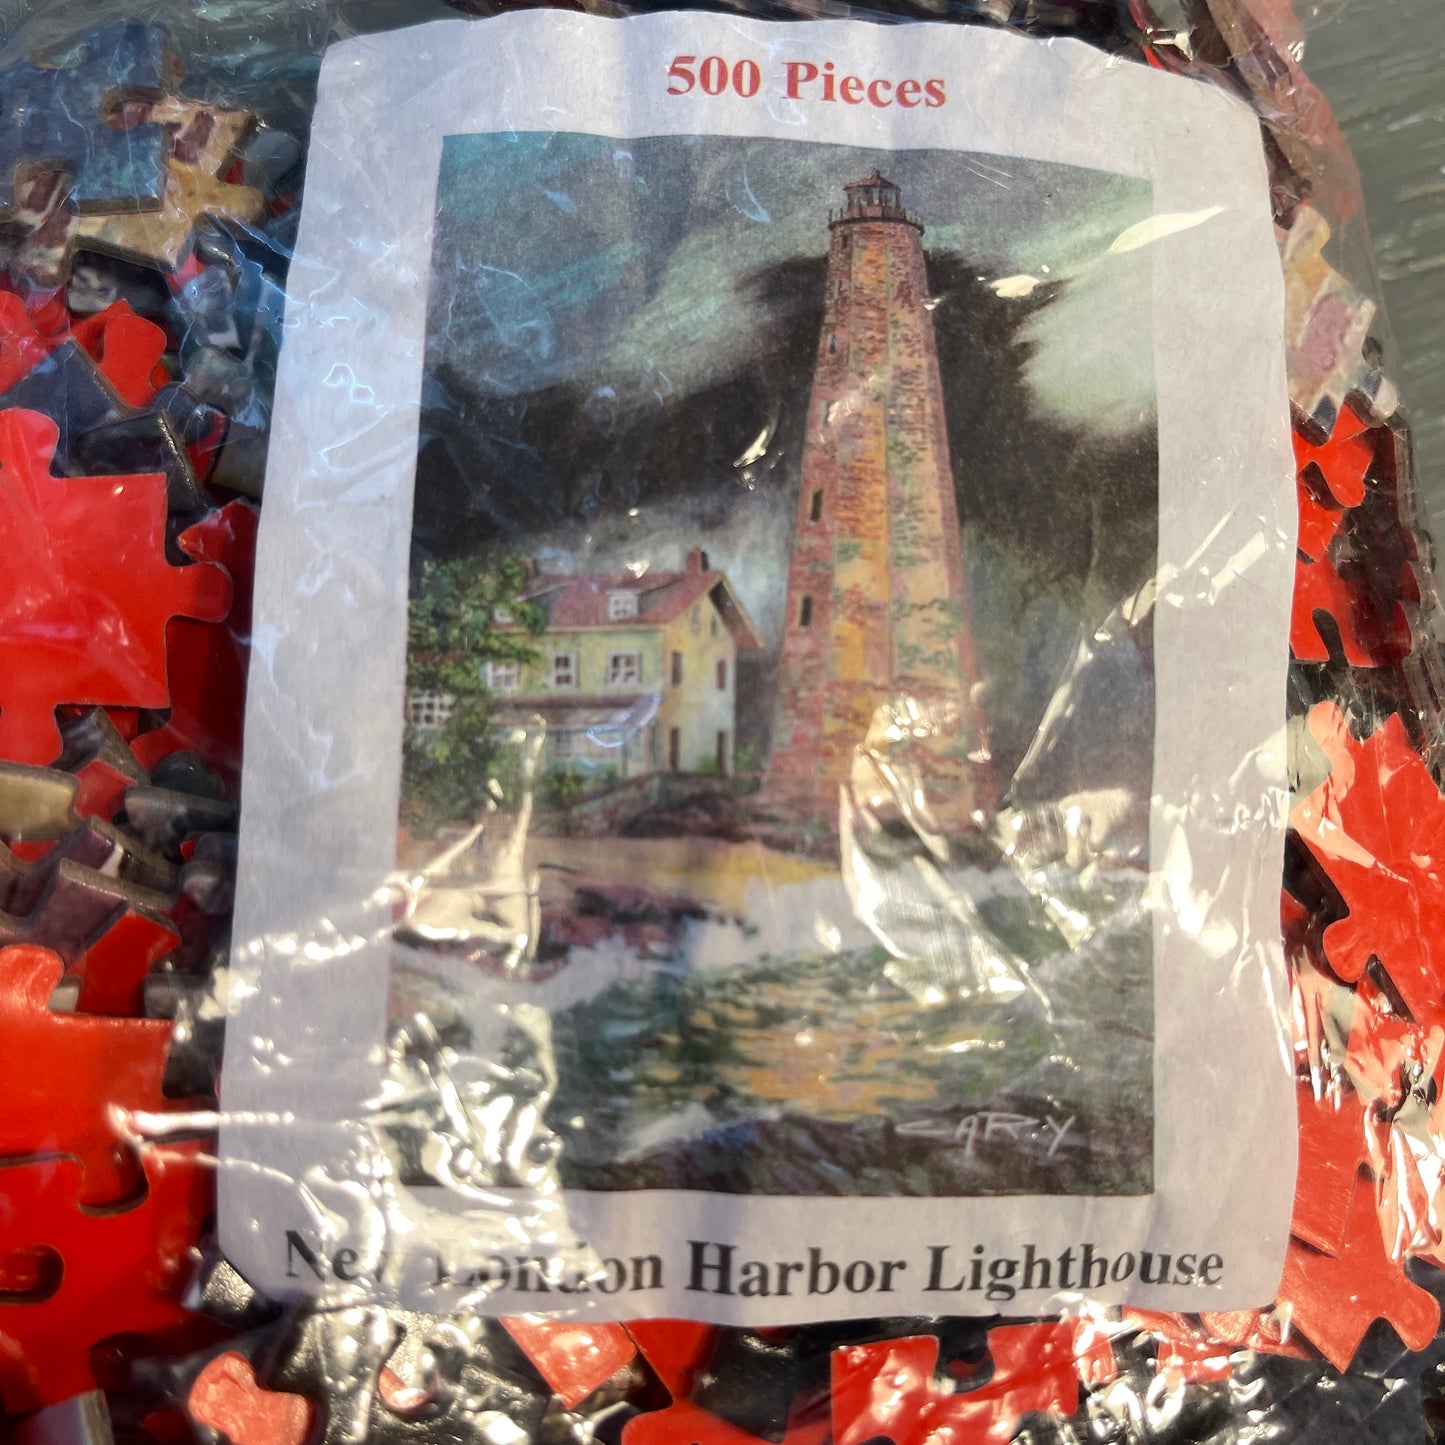 Lighthouse puzzles, choice of 4, 500 piece, nautical theme puzzles depicting lighthouses, see variations*